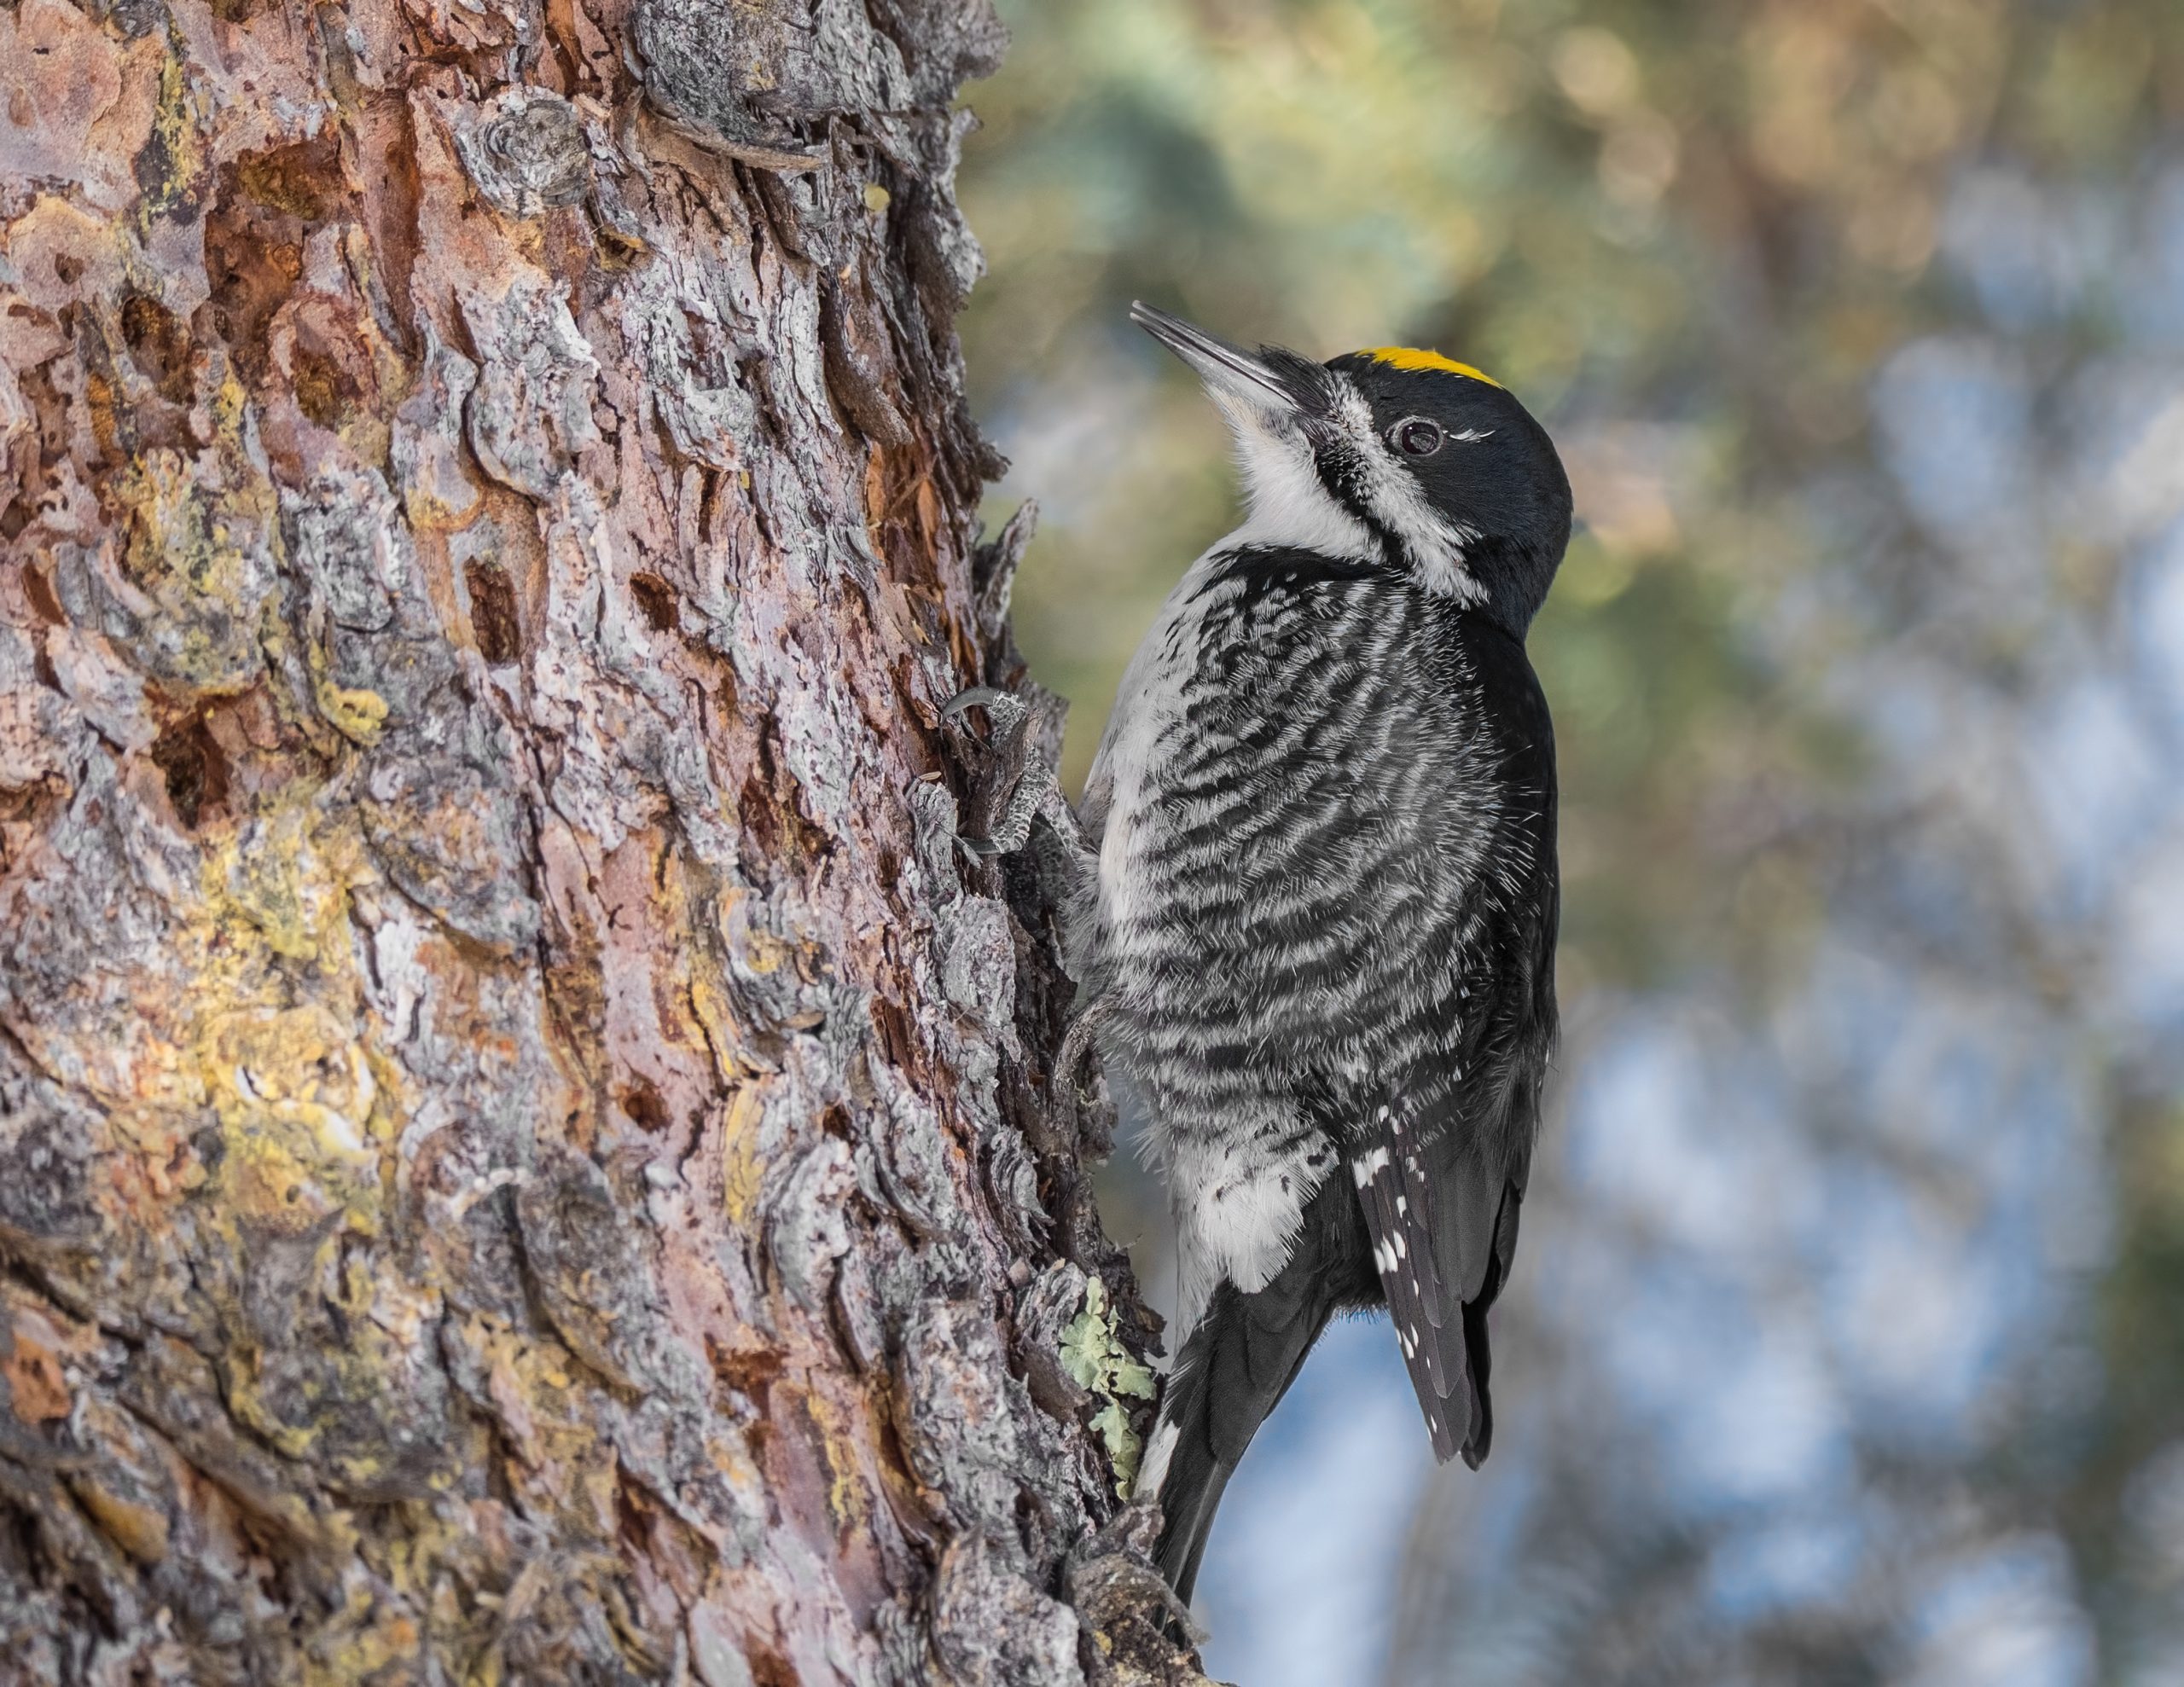 How to Identify a Black-Backed Woodpecker